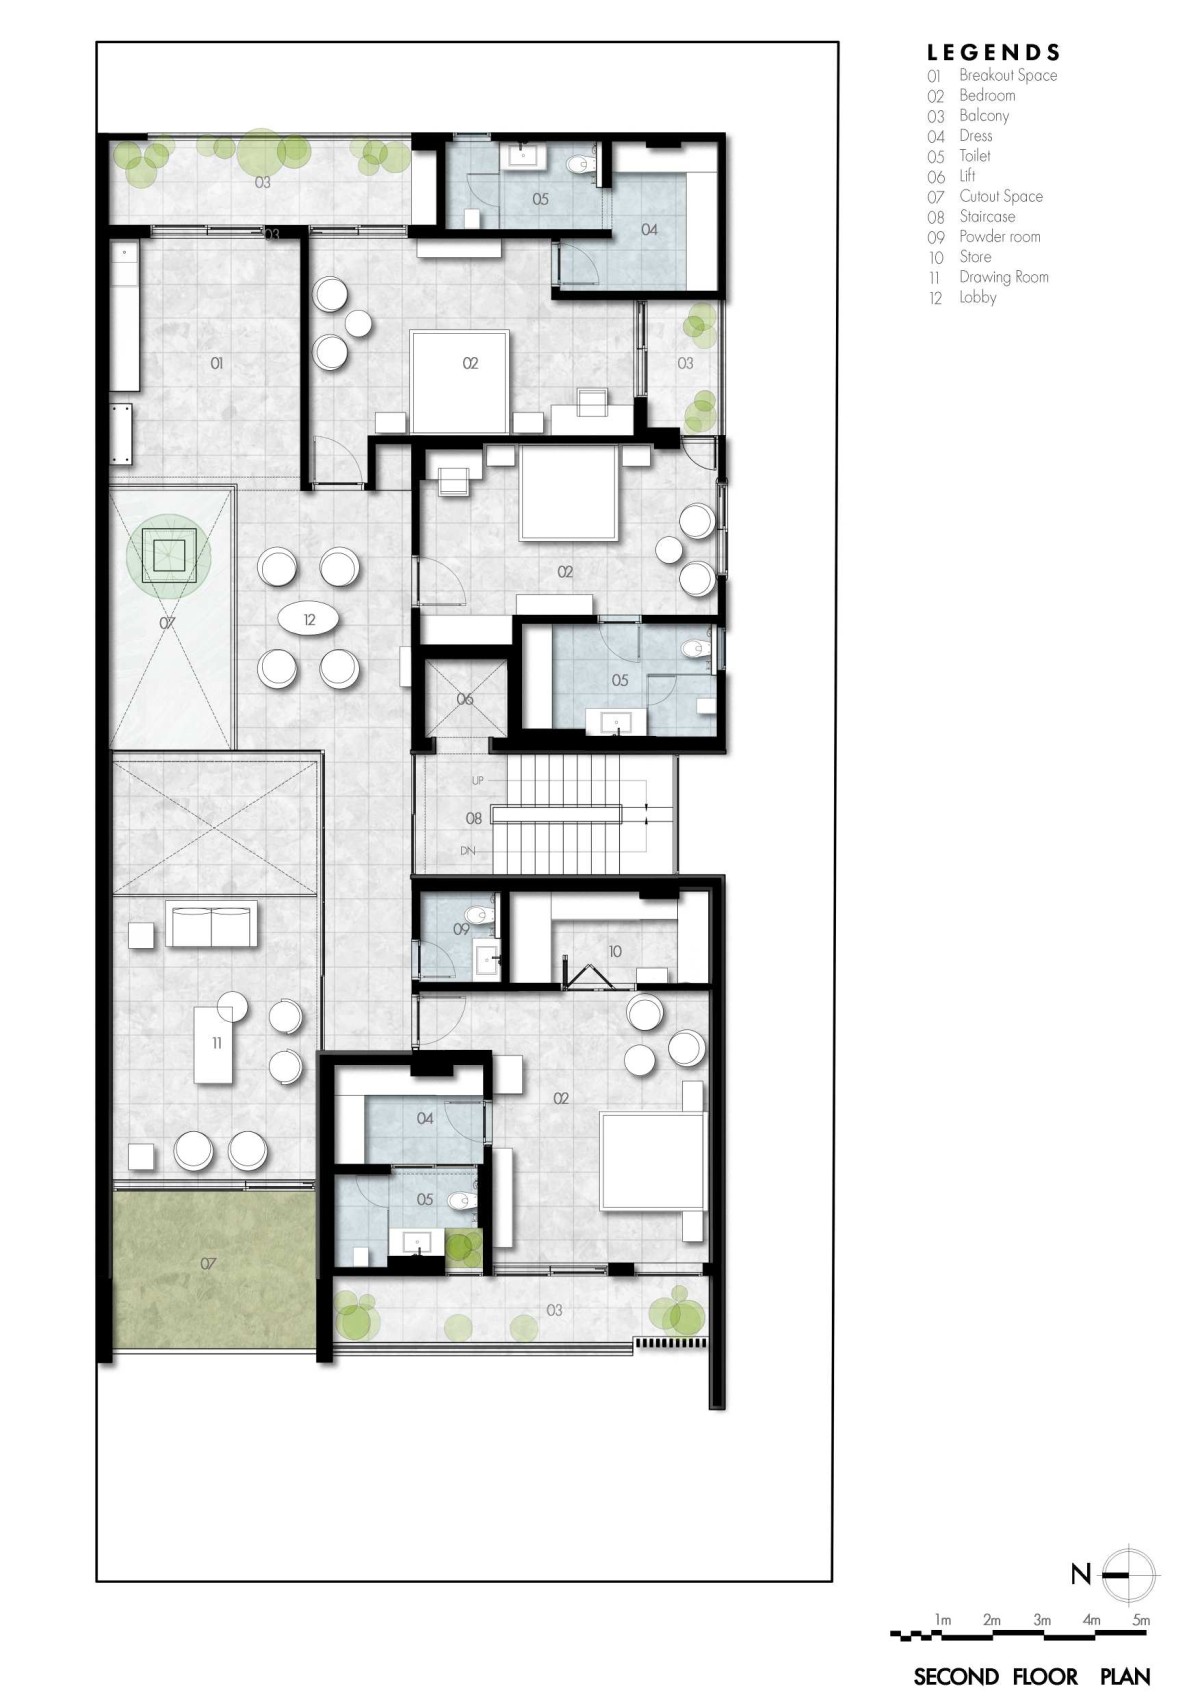 Second floor plan of Swatantra Residence by Spaces Architects@ka